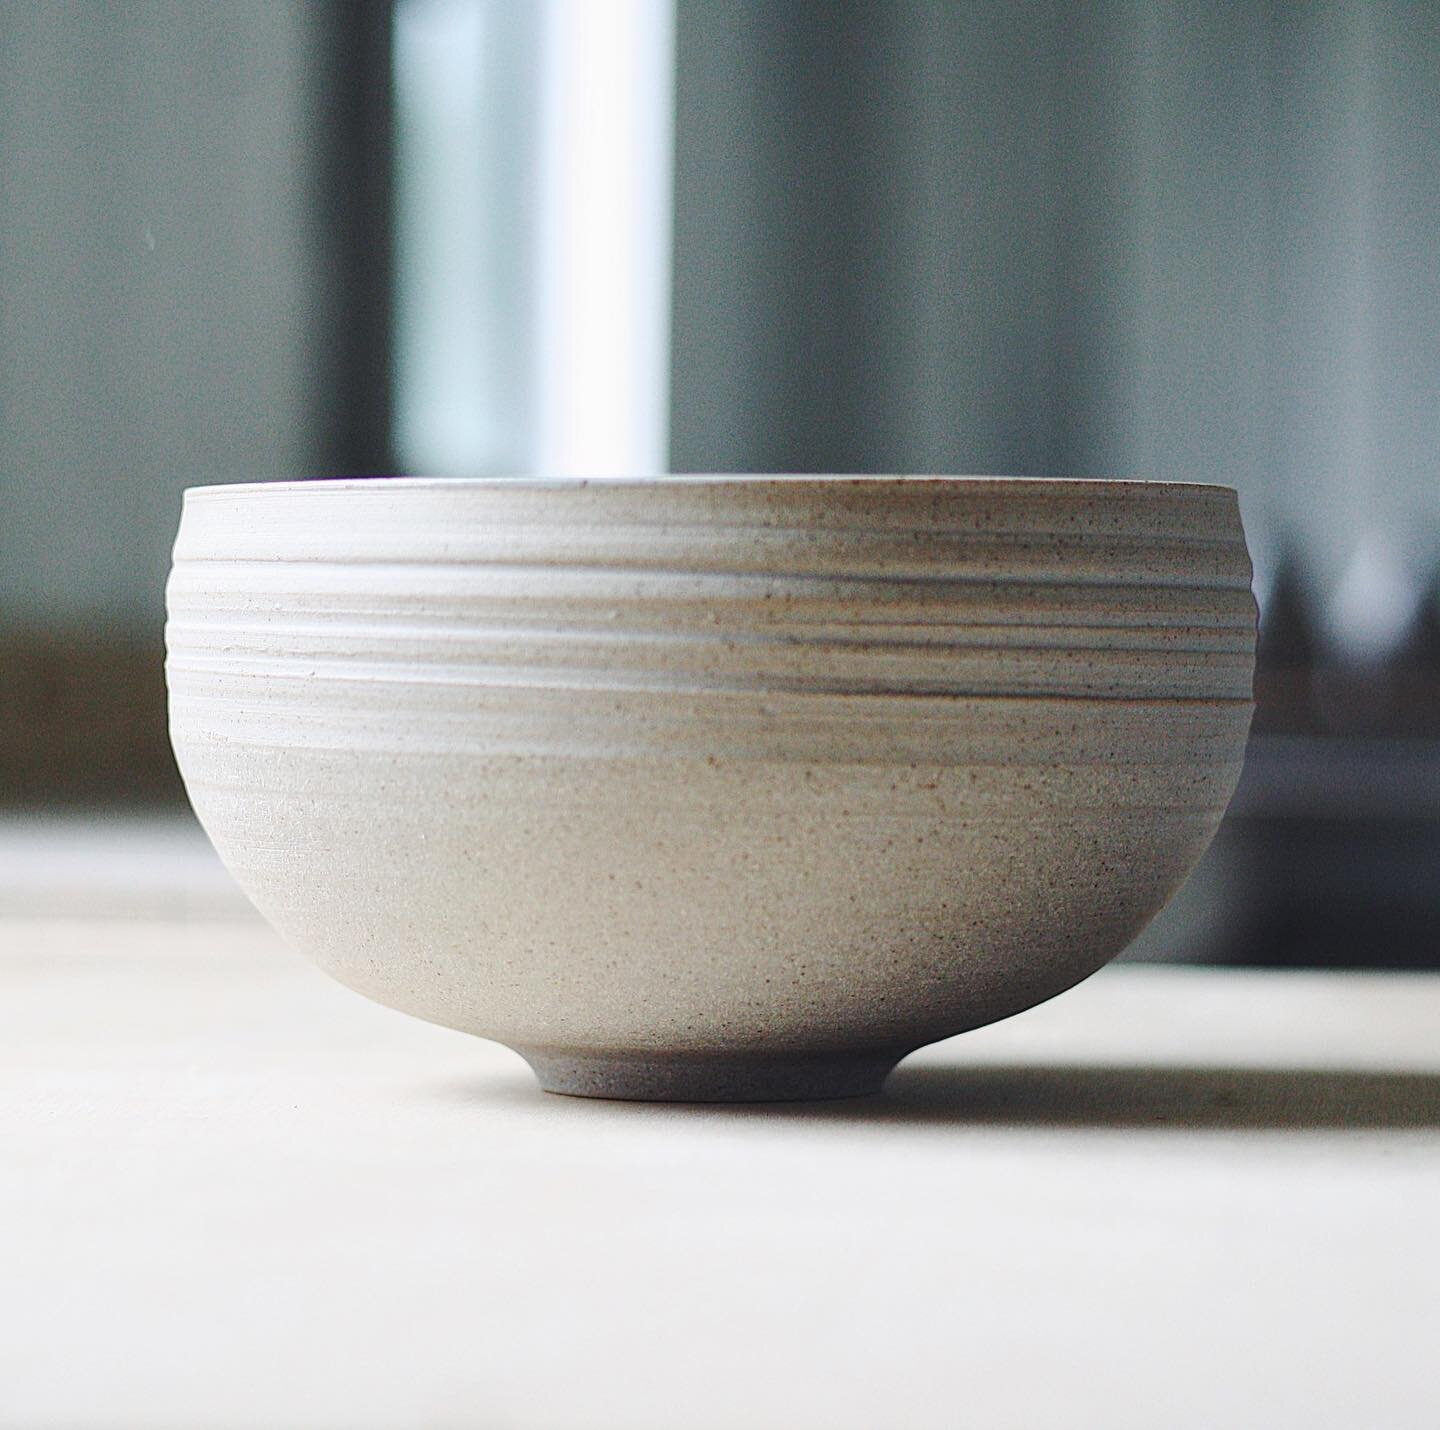 Bellied bowl, grey stoneware with matte white interior. Annoyingly un-stackable, happily rounded and functional.